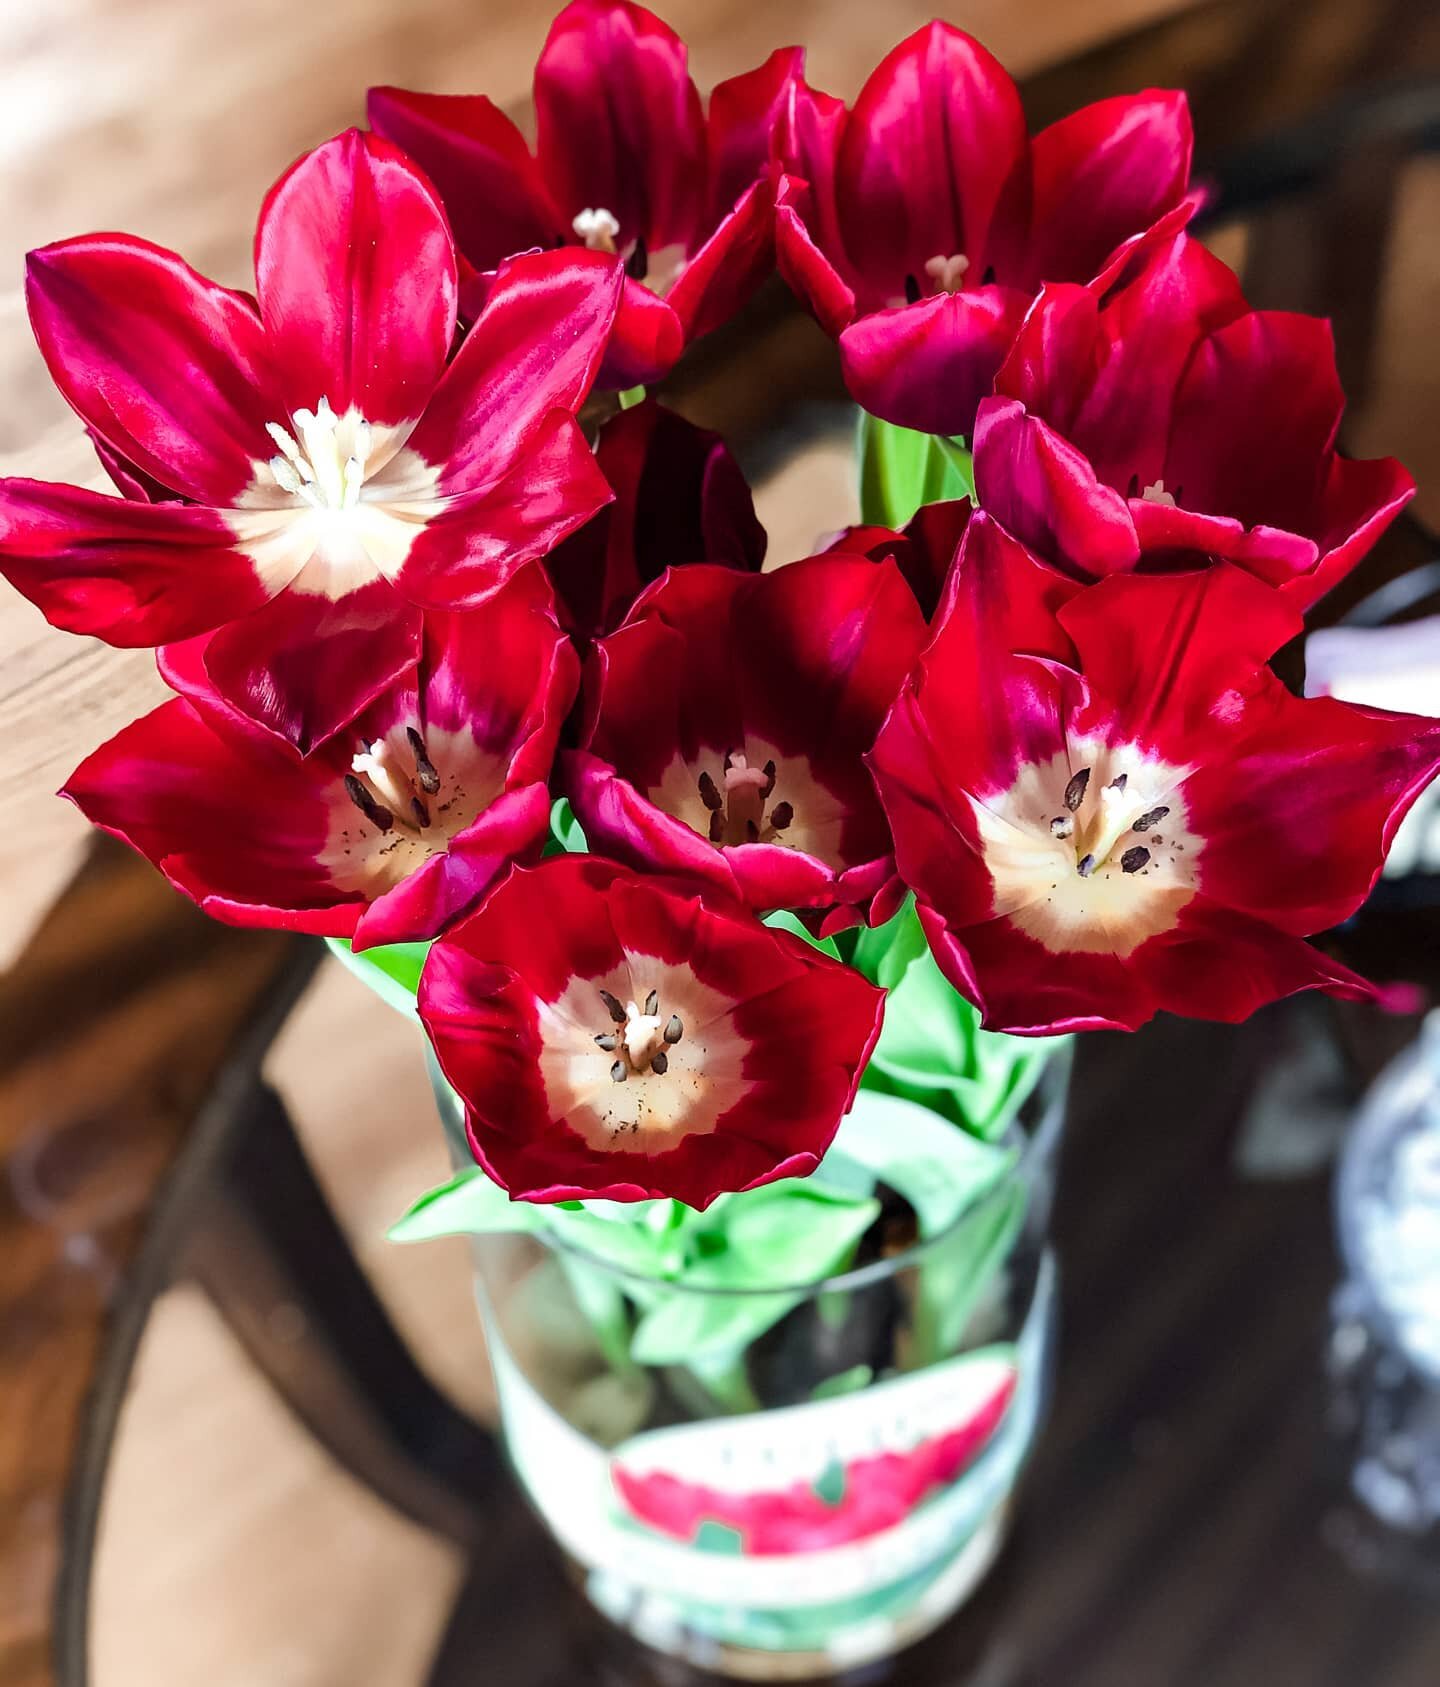 &quot;We don&rsquo;t ask a flower any special reason for its existence. We just look at it and are able to accept it as being something different for ourselves&quot; ❤
⠀
- Gwendolyn Brooks
⠀
#bloomaker #tulips #longlifetulips